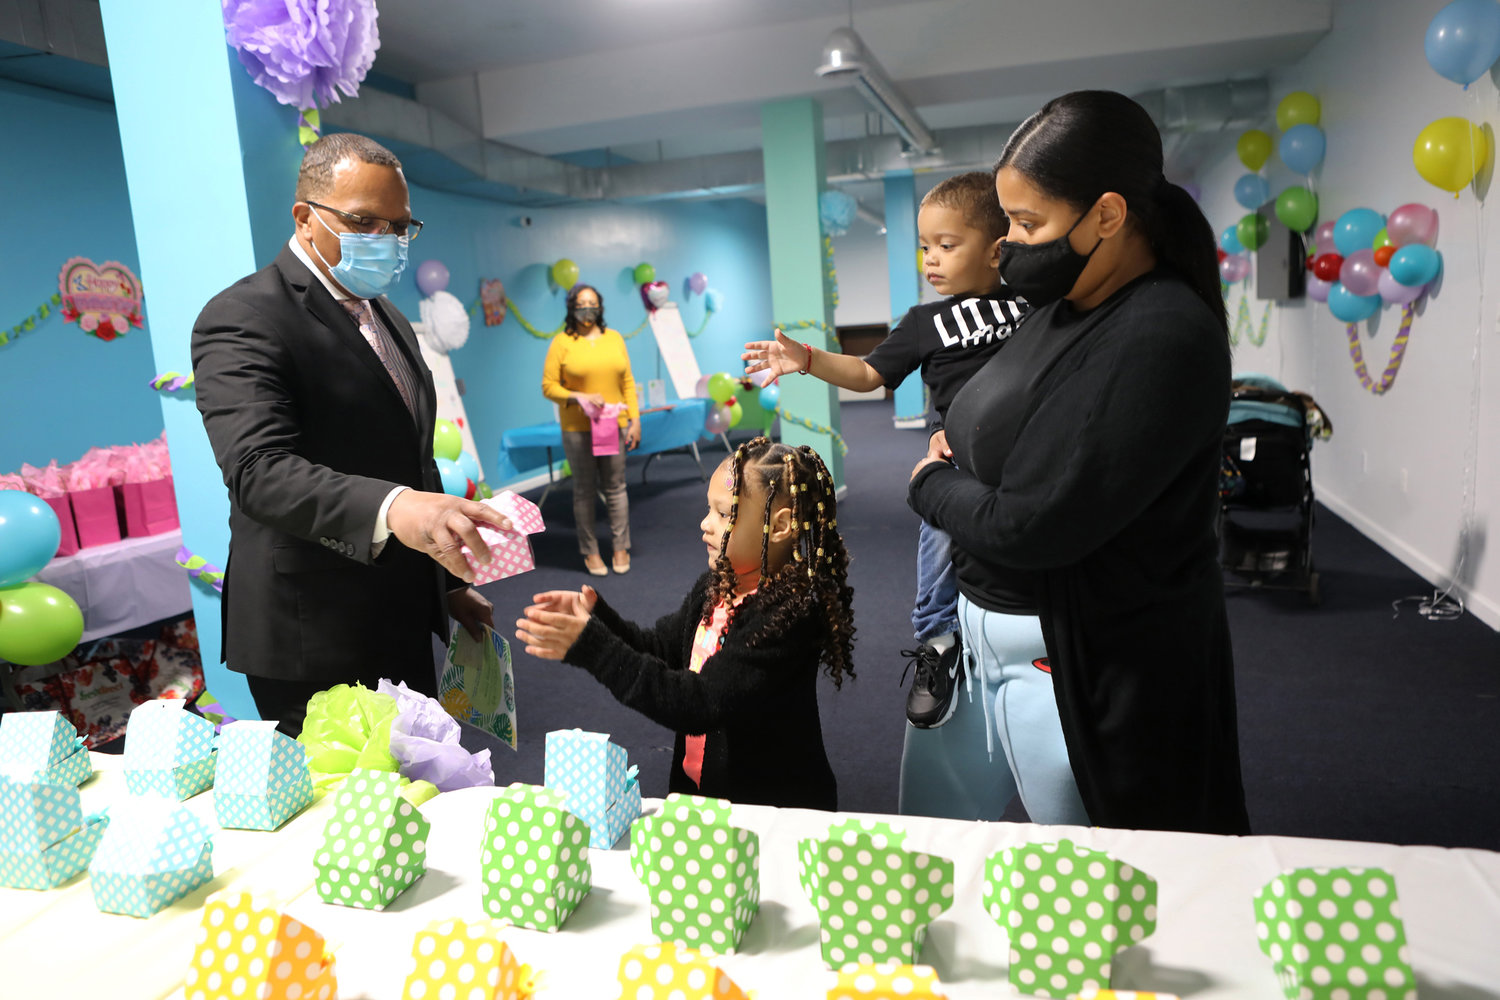 Andre Coleman, the program director at the Broadway Family Plaza transitional housing facility gives a cupcake to Karla’s children, McKenzly and McKayson, during a Mother’s Day event last week. The event was part of a produce drive organized by Kingsbridge Unidos, a mutual aid group ensuring families get fresh vegetables in this part of the Bronx.